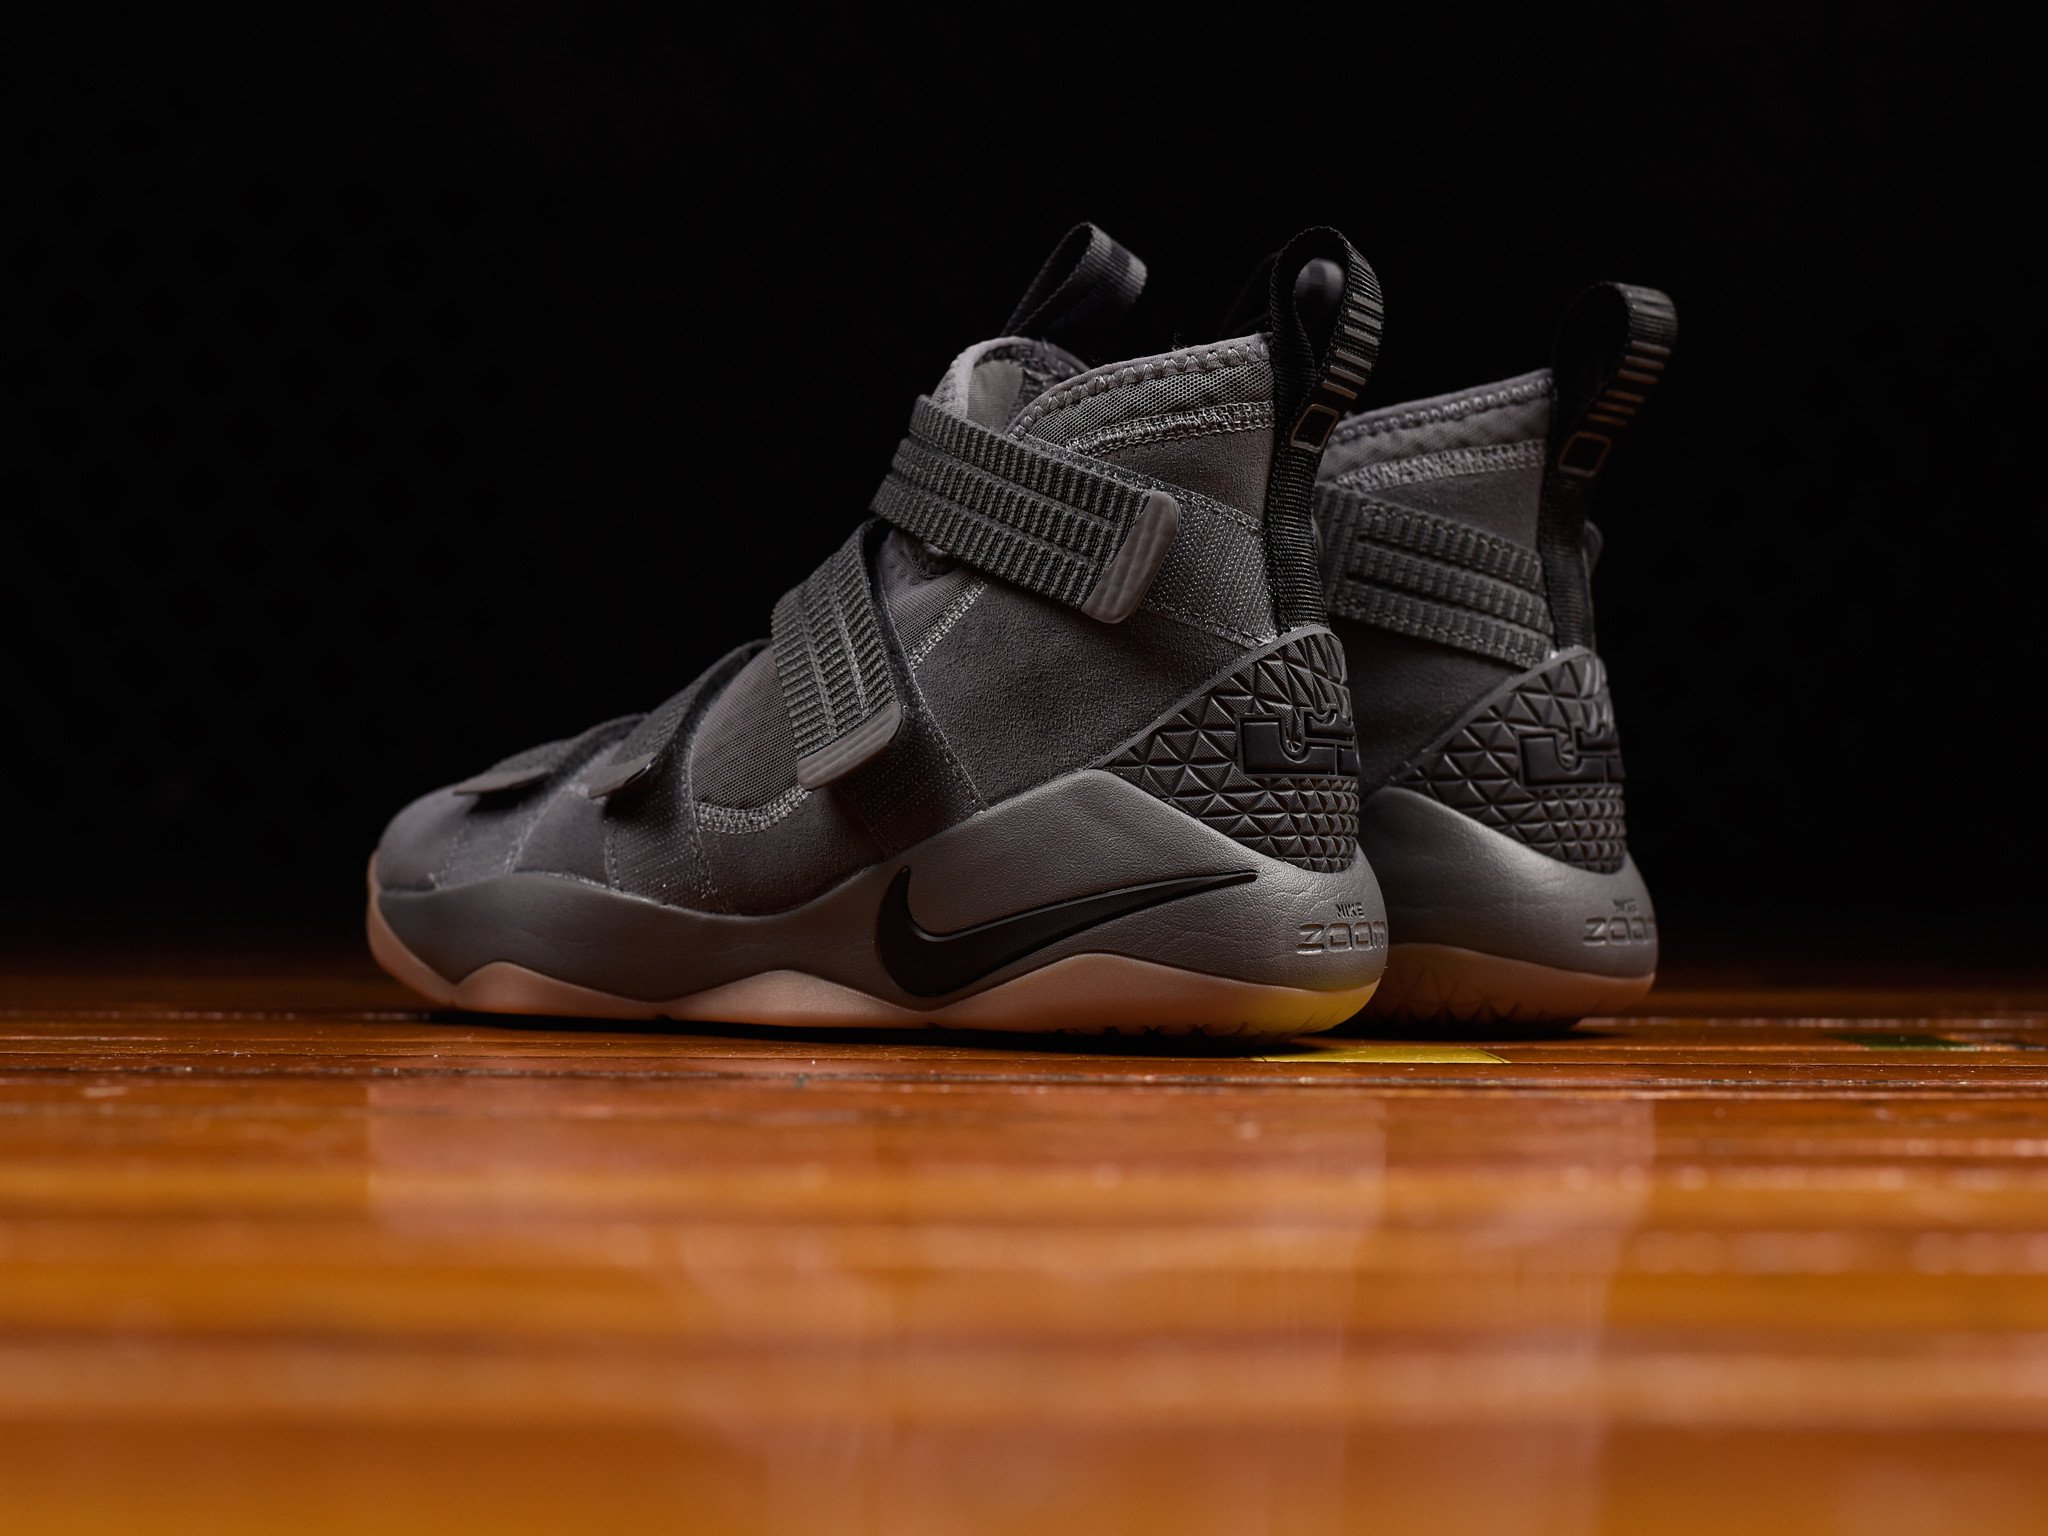 soldier 11 review